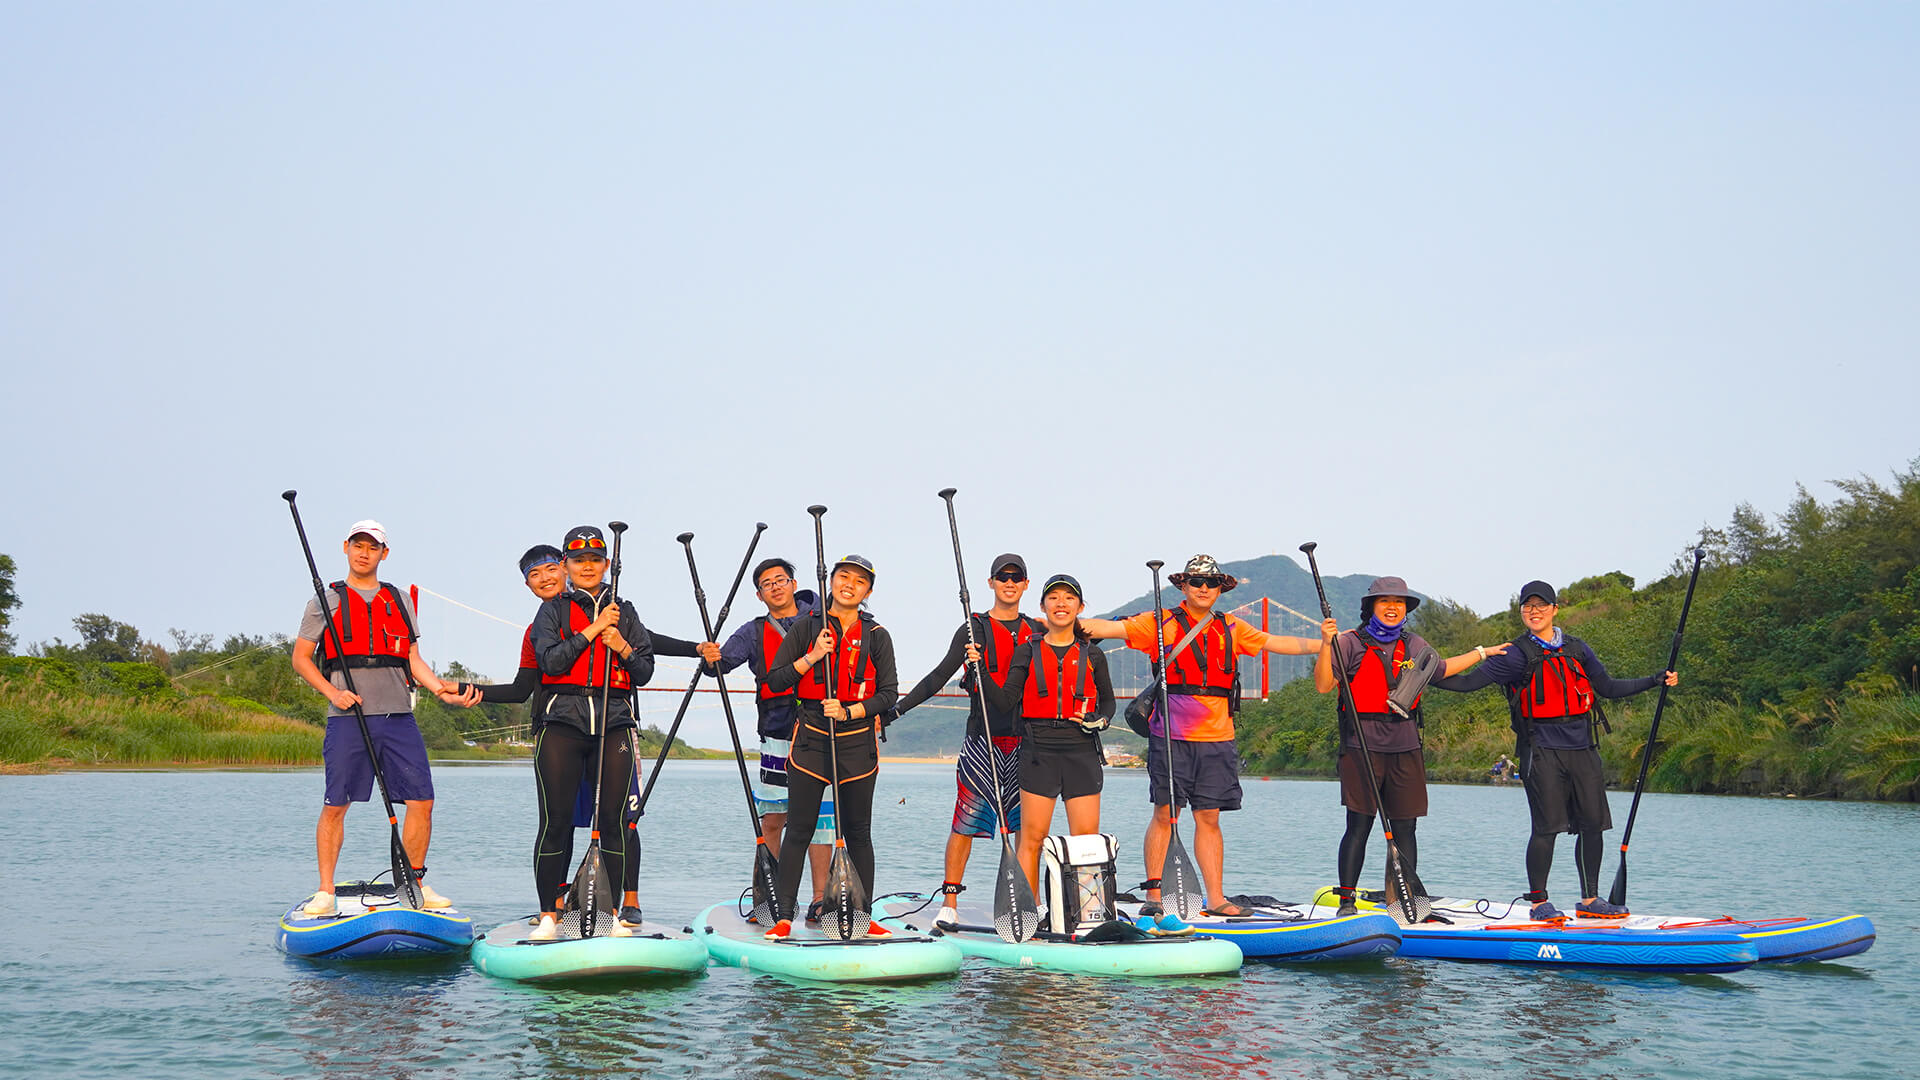 SUP立槳 – Stand up paddle！